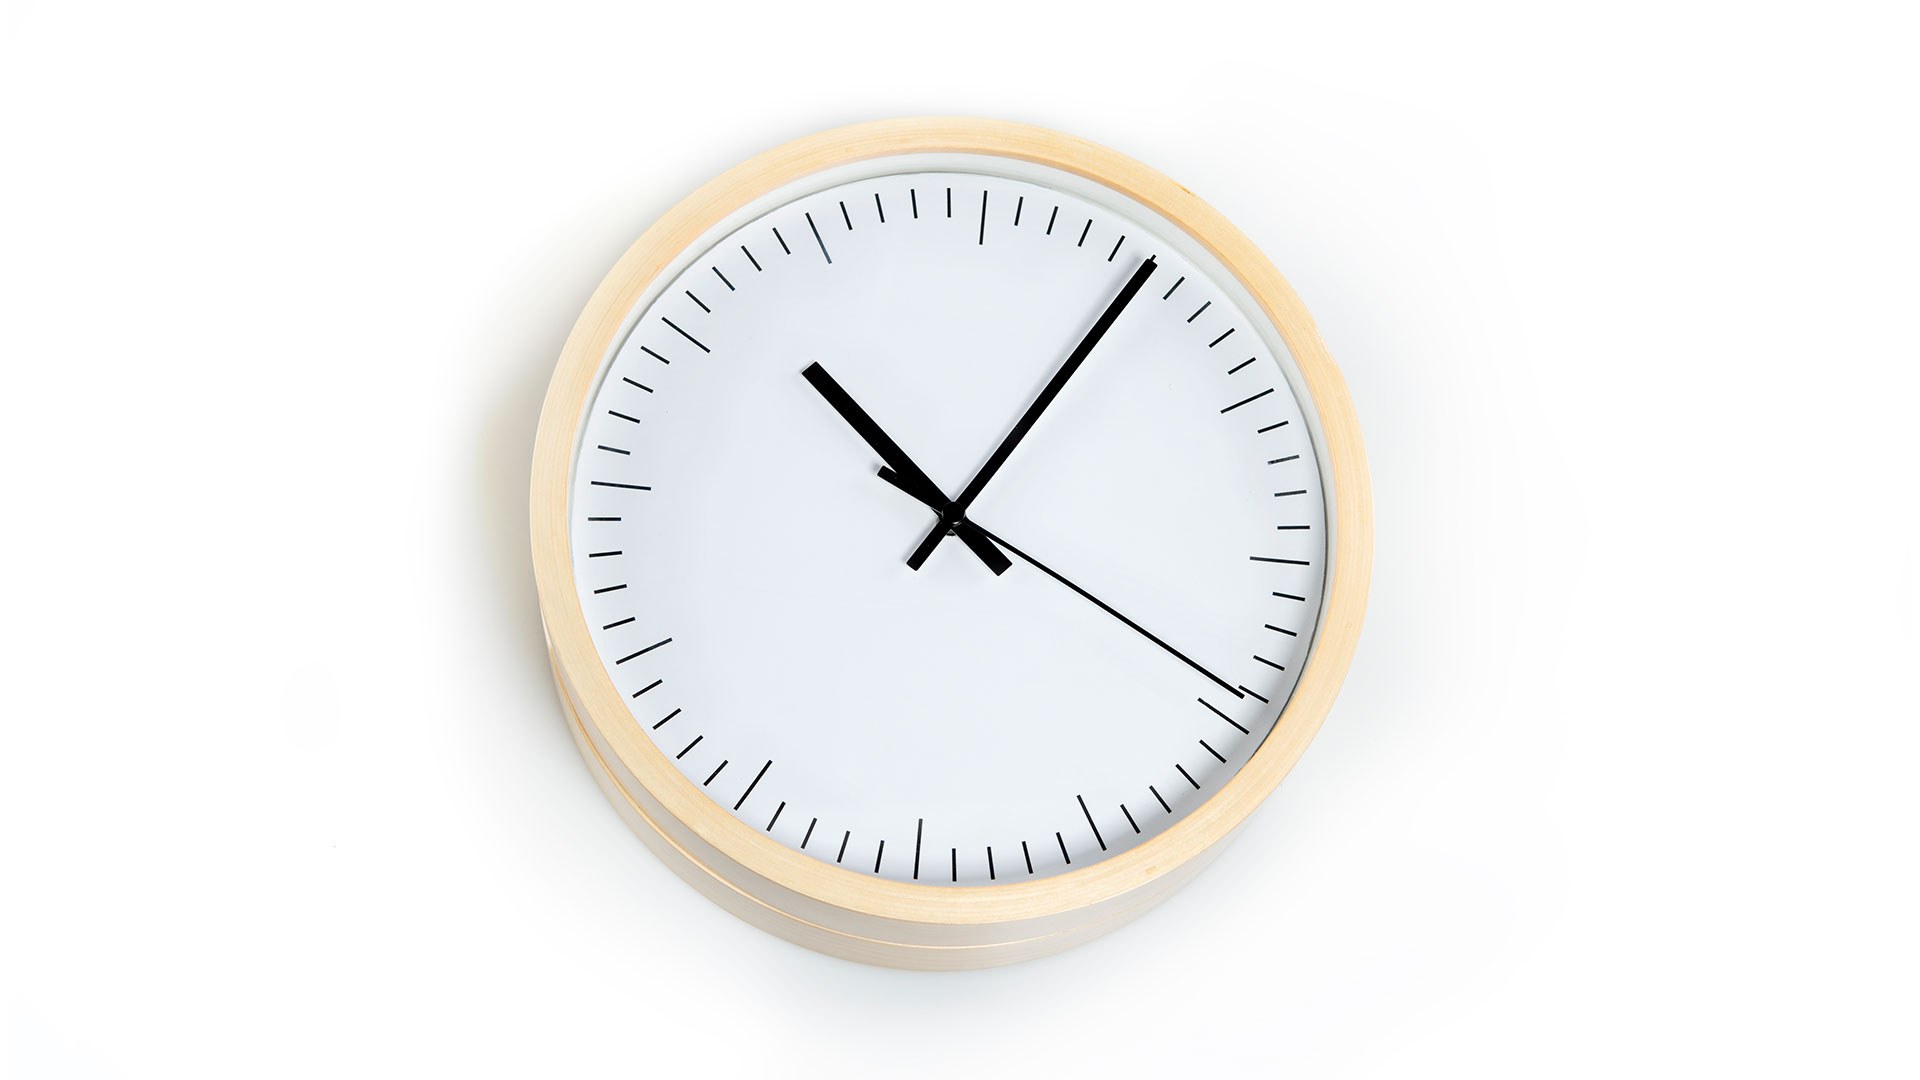 Round analog clock with simple black dash marks in number locations, a minute hand and an hour hand and a second hand, simple light colored wood exterior circle